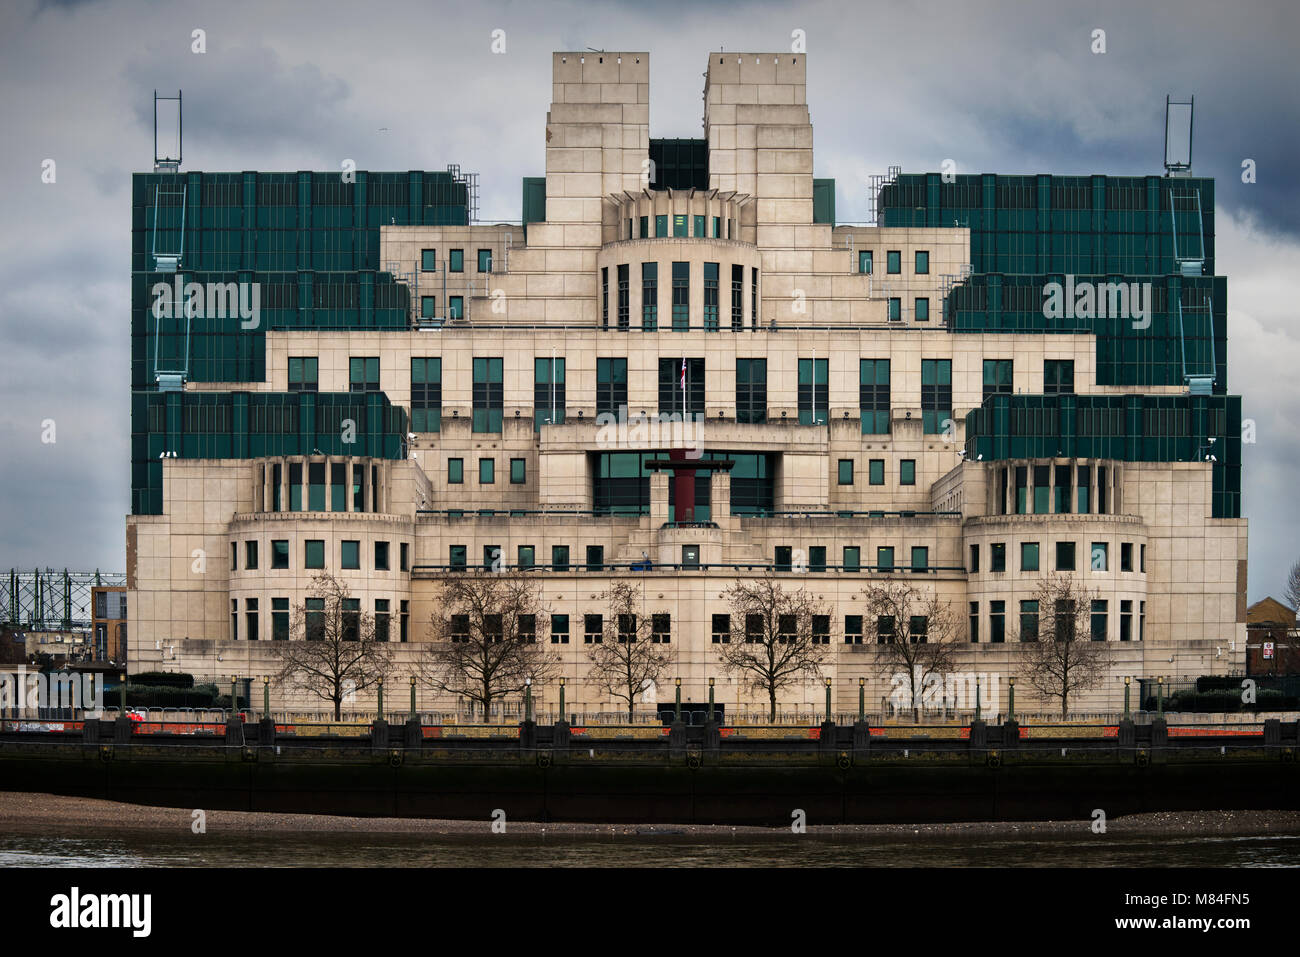 MI6 - SIS Headquarters at Vauxhall Cross, London, England UK. March 2018 The SIS Building or MI6 Building at Vauxhall Cross houses the headquarters of Stock Photo